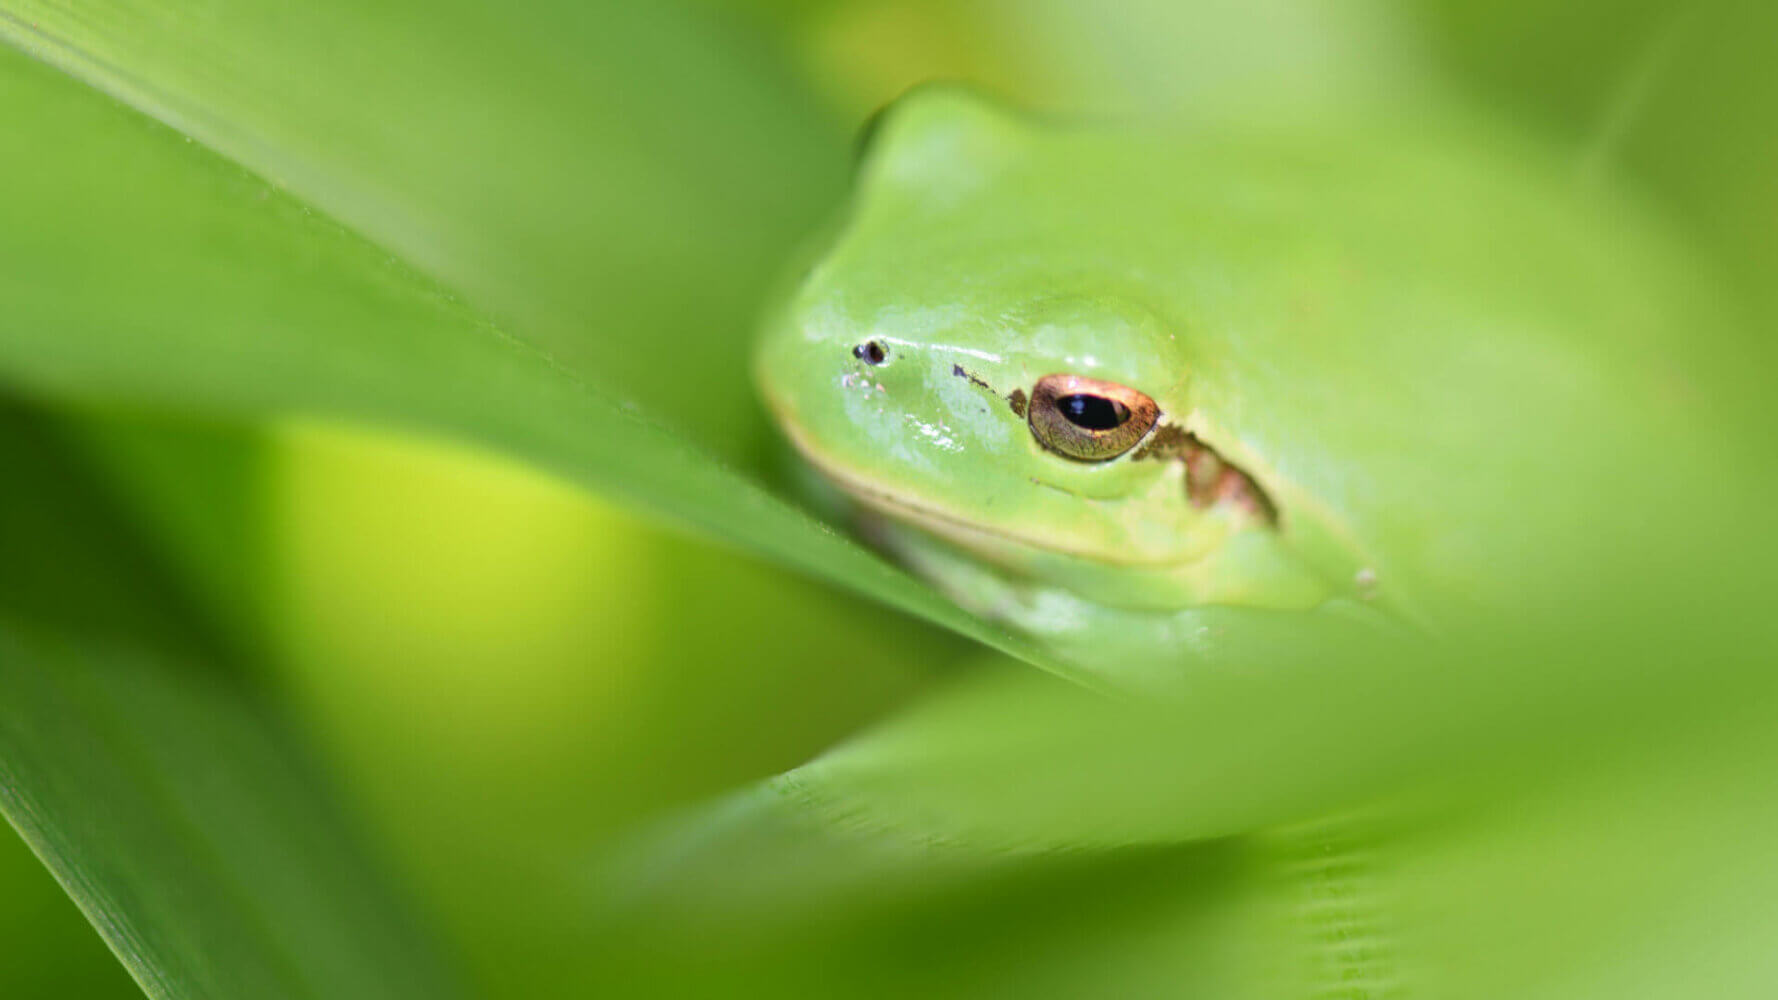 A green frog against bright green leaves, green muni